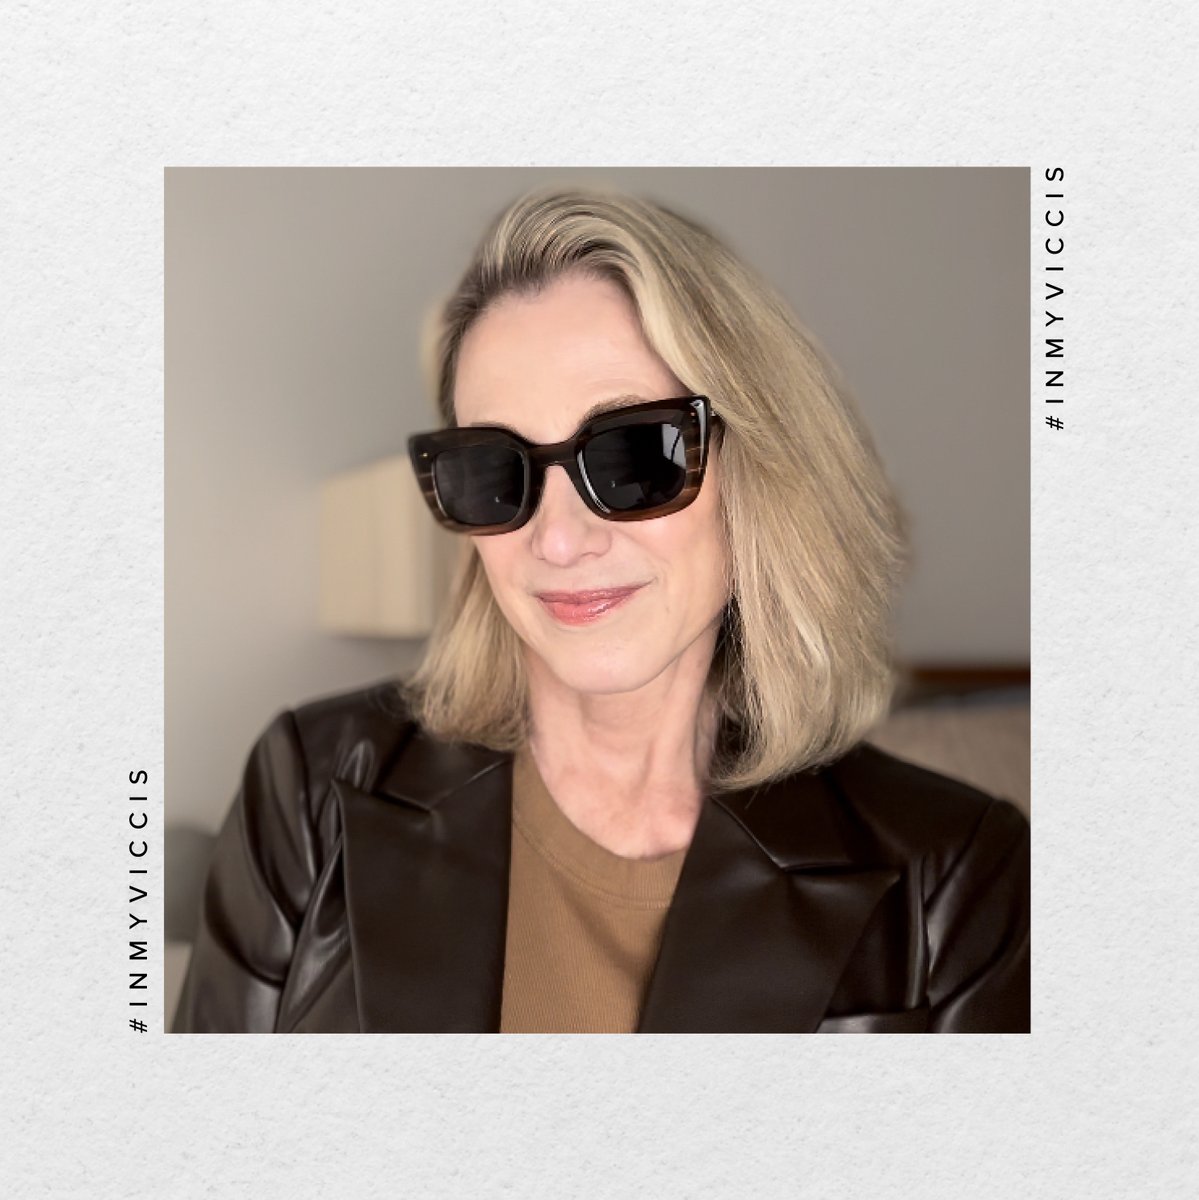 Embrace your unique self with our striking Sofia shades 🕶️🌞 Featuring a 3D acetate frame and vintage-inspired cat-eye design, these sunnies bring the wow factor and make you stand out!

#fashionablewomen #eyeprotection #womanlook #womanfashionstyle #luxurystore